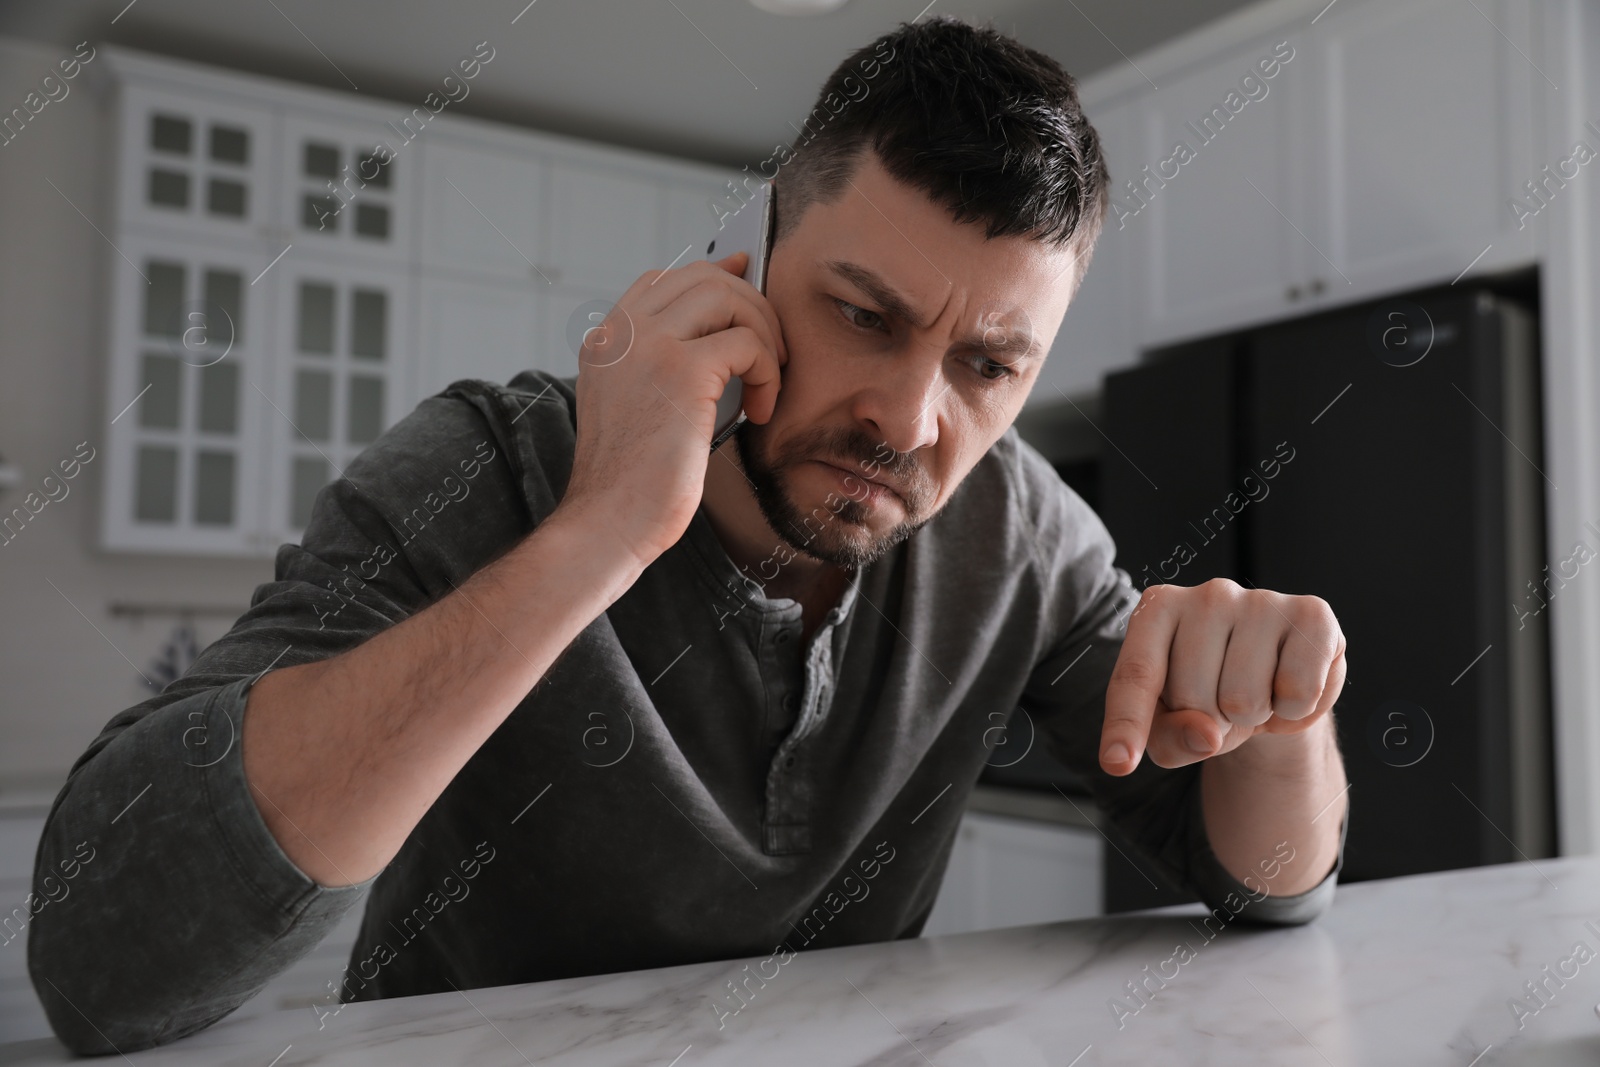 Photo of Emotional man talking on phone at table in kitchen. Hate concept